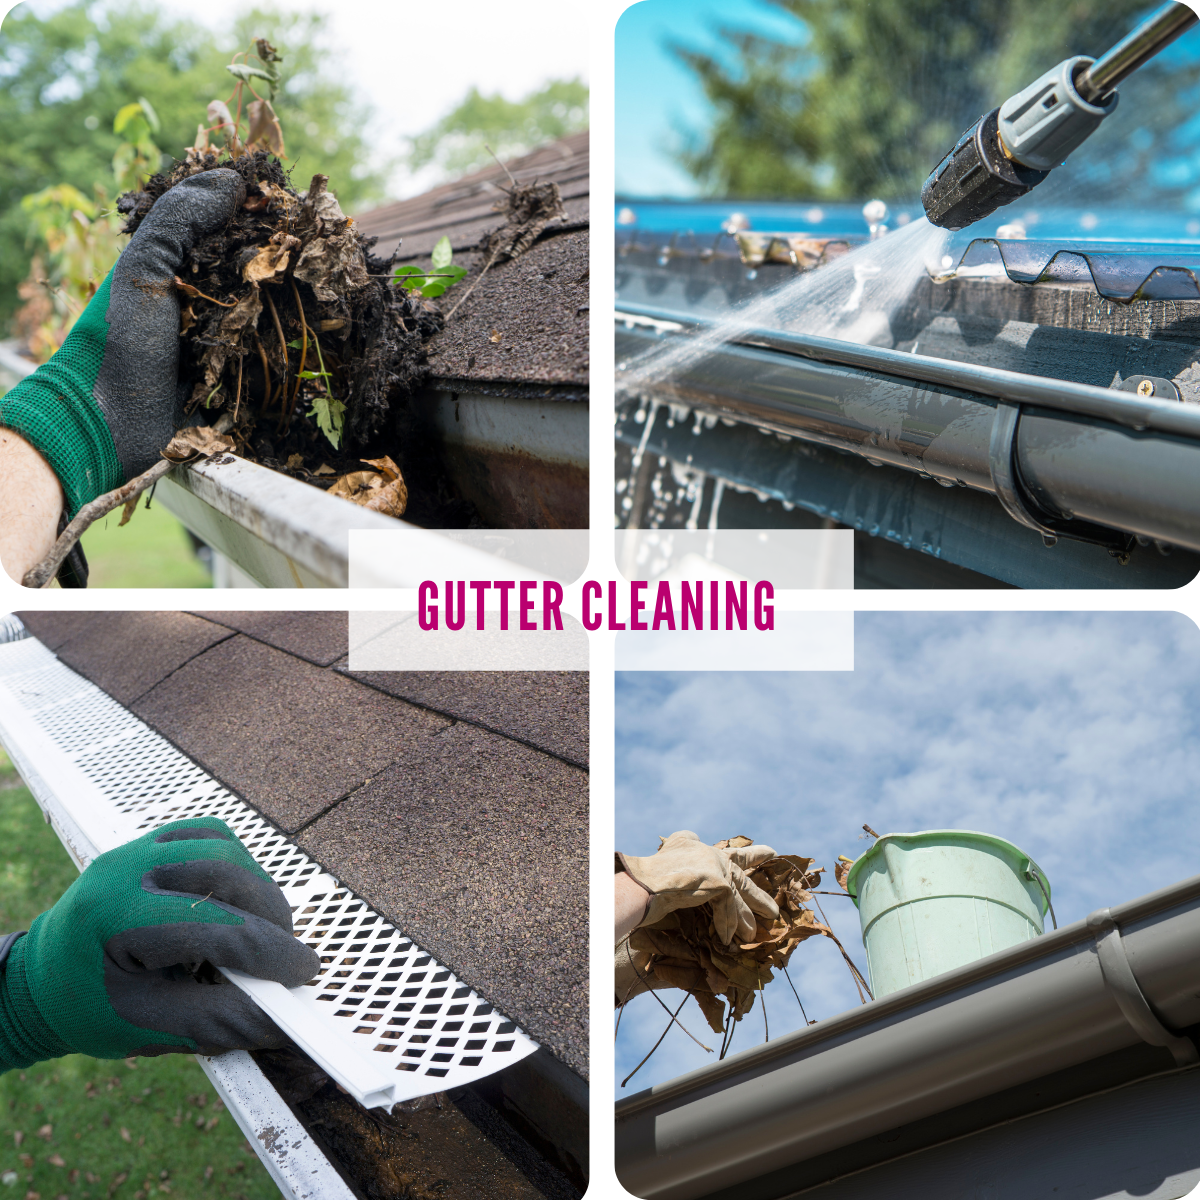 Gutter cleaning Hire A Hubby Castle Hill Rouse Hill 1800 803 339